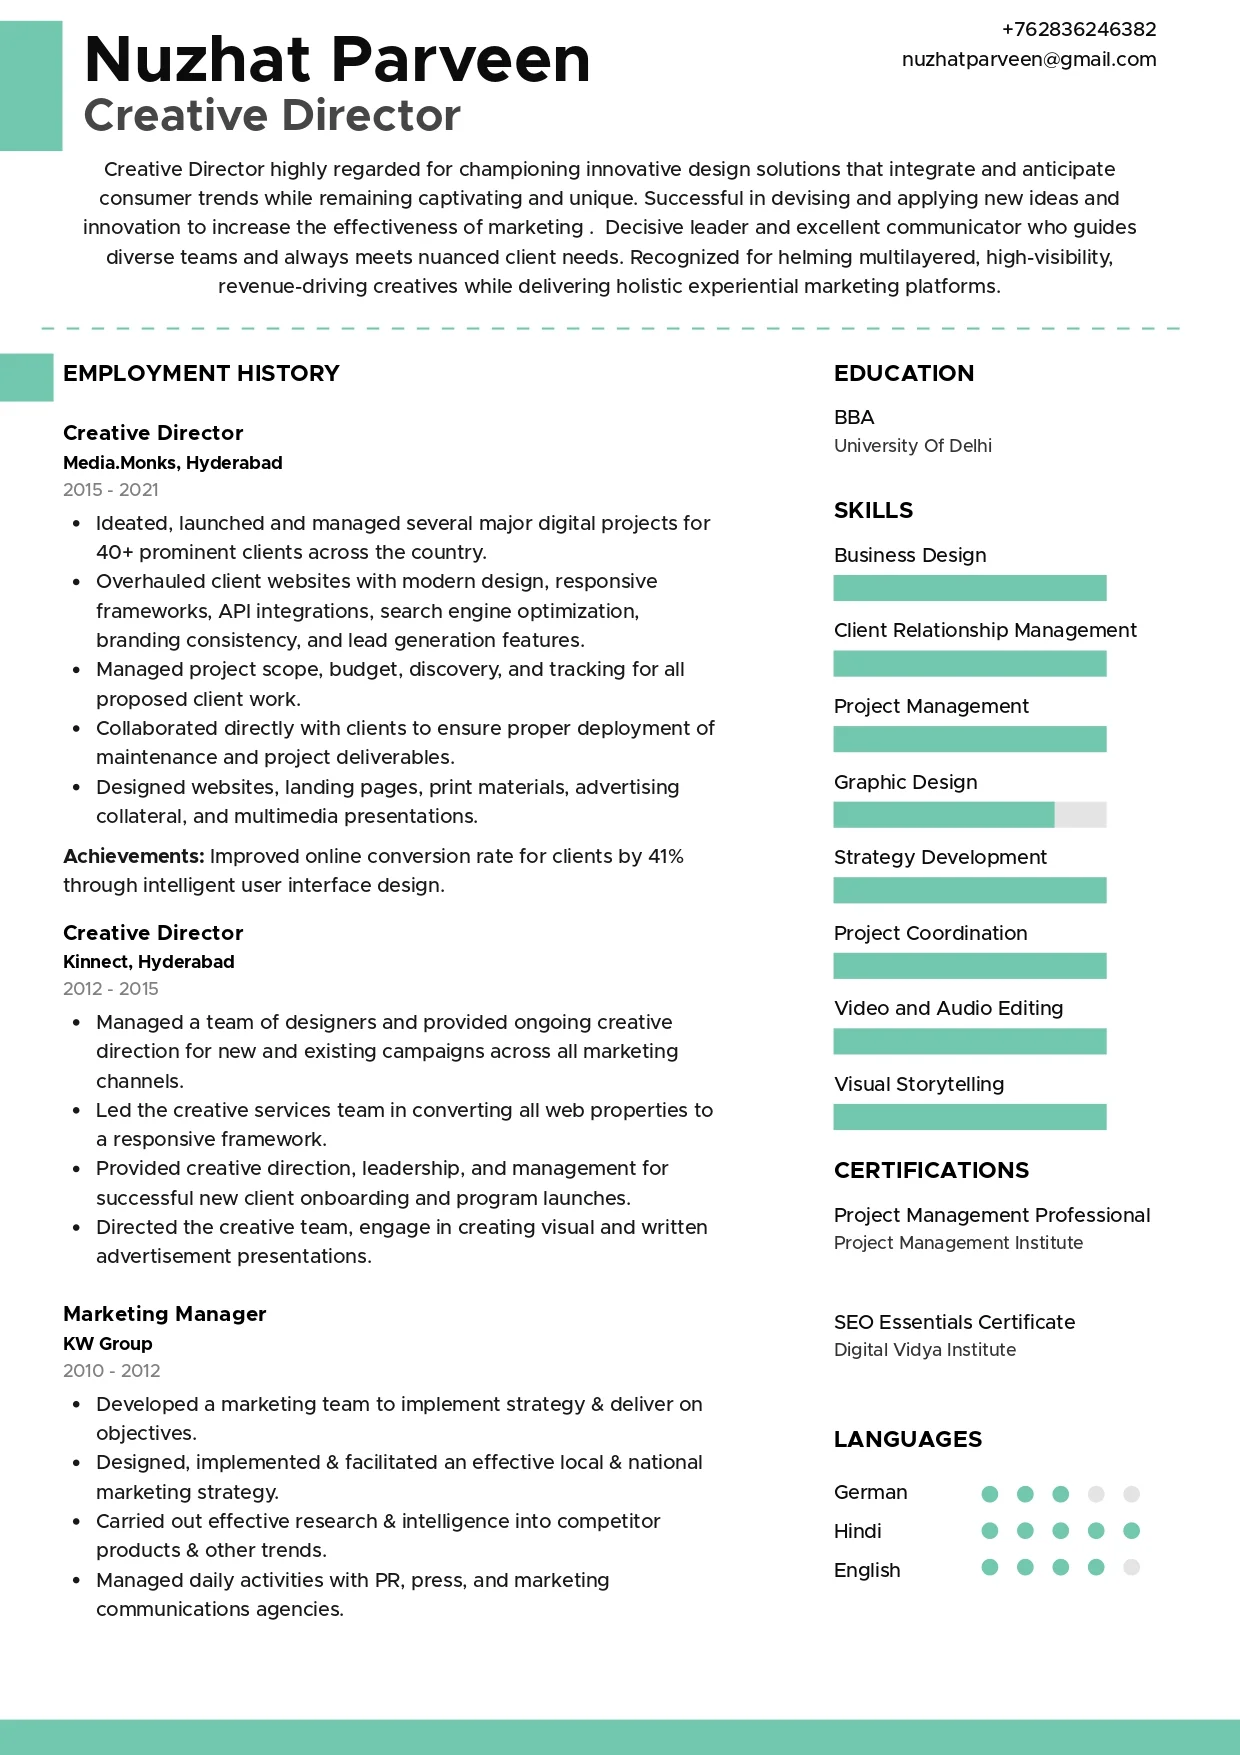 Sample Resume of Creative Director | Free Resume Templates & Samples on Resumod.co